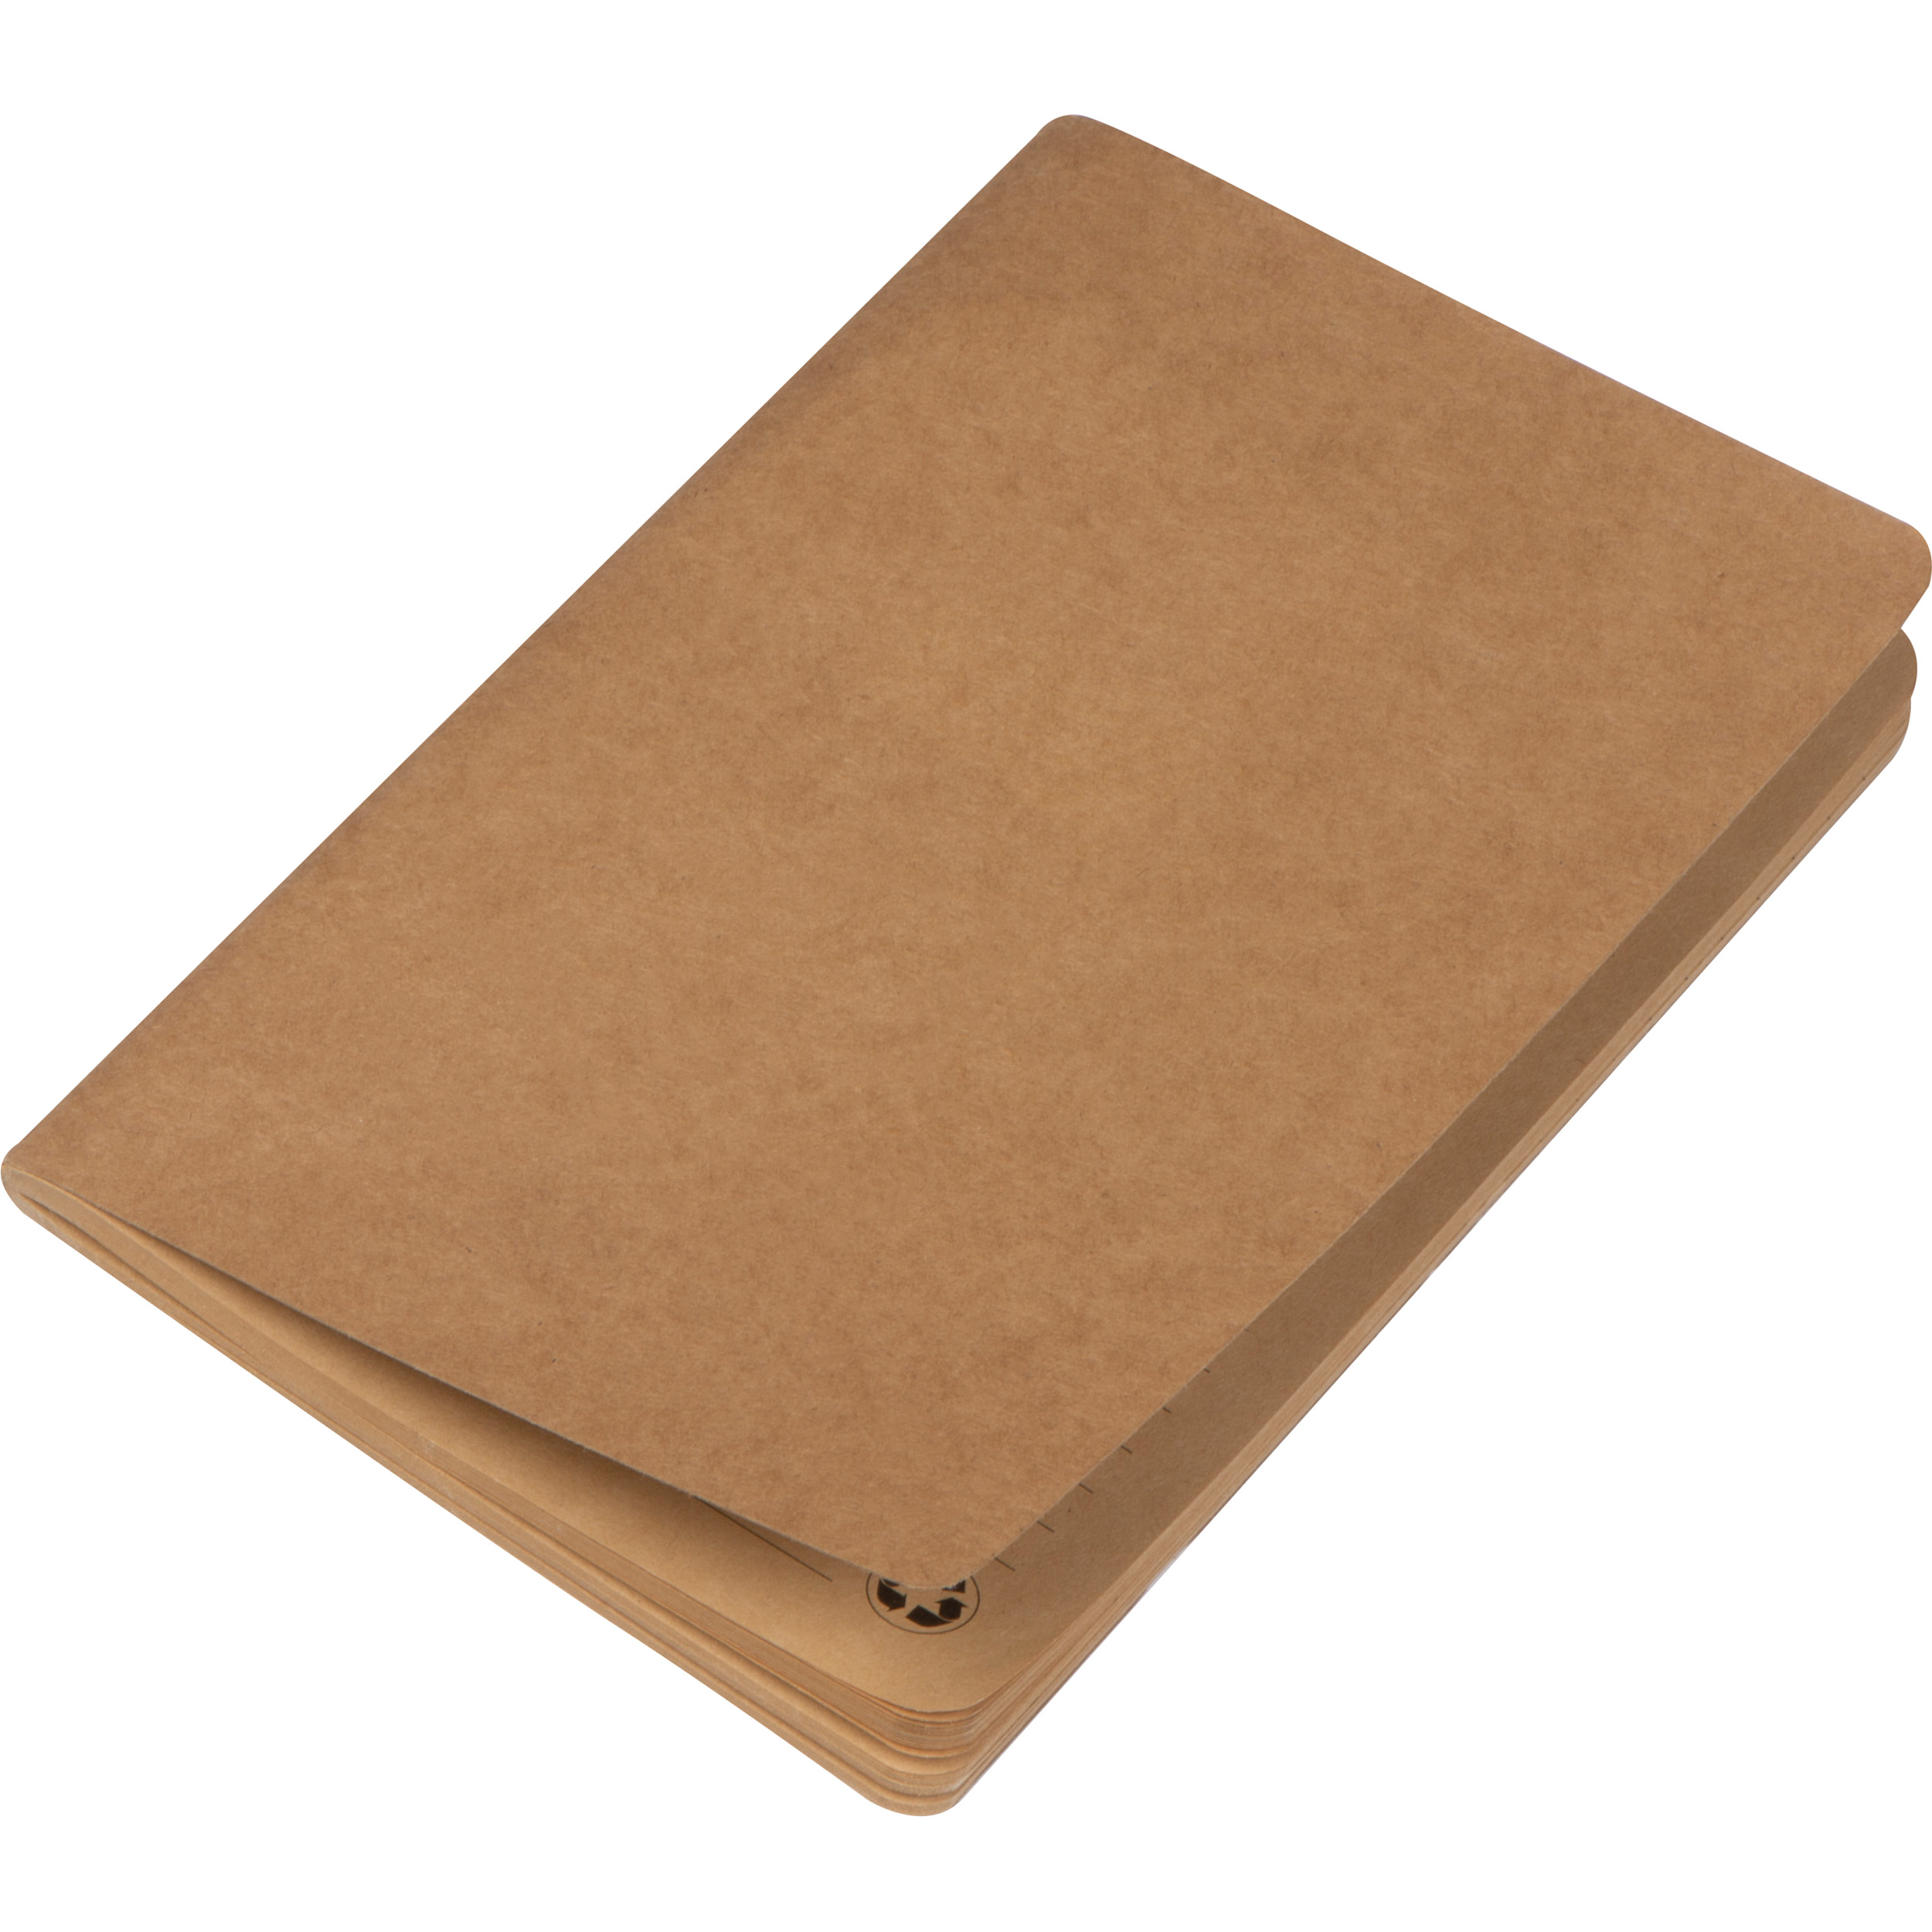 Recycled notebook, lined